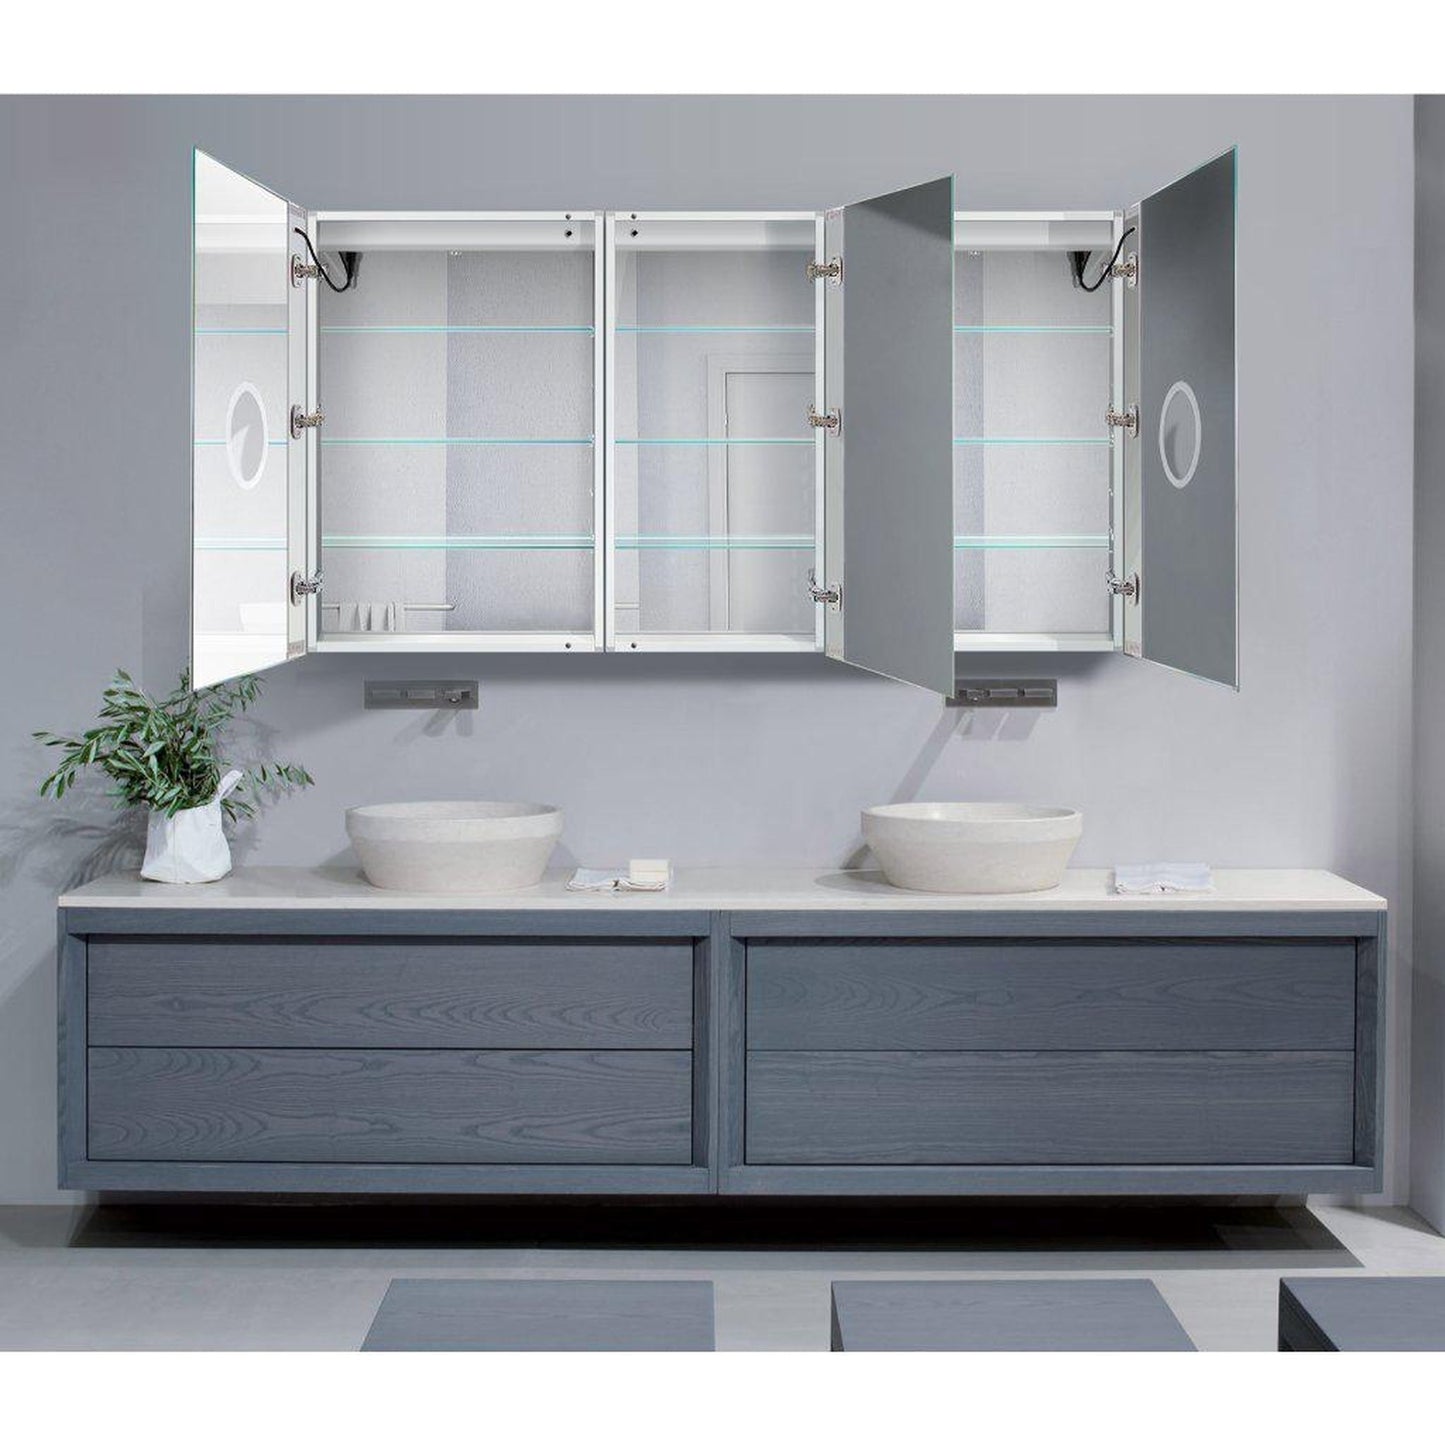 Krugg Reflections Svange 66" x 36" 5000K Double Tri-View Left-Right-Right Opening Recessed/Surface-Mount Illuminated Silver Backed LED Medicine Cabinet Mirror With Built-in Defogger, Dimmer and Electrical Outlet